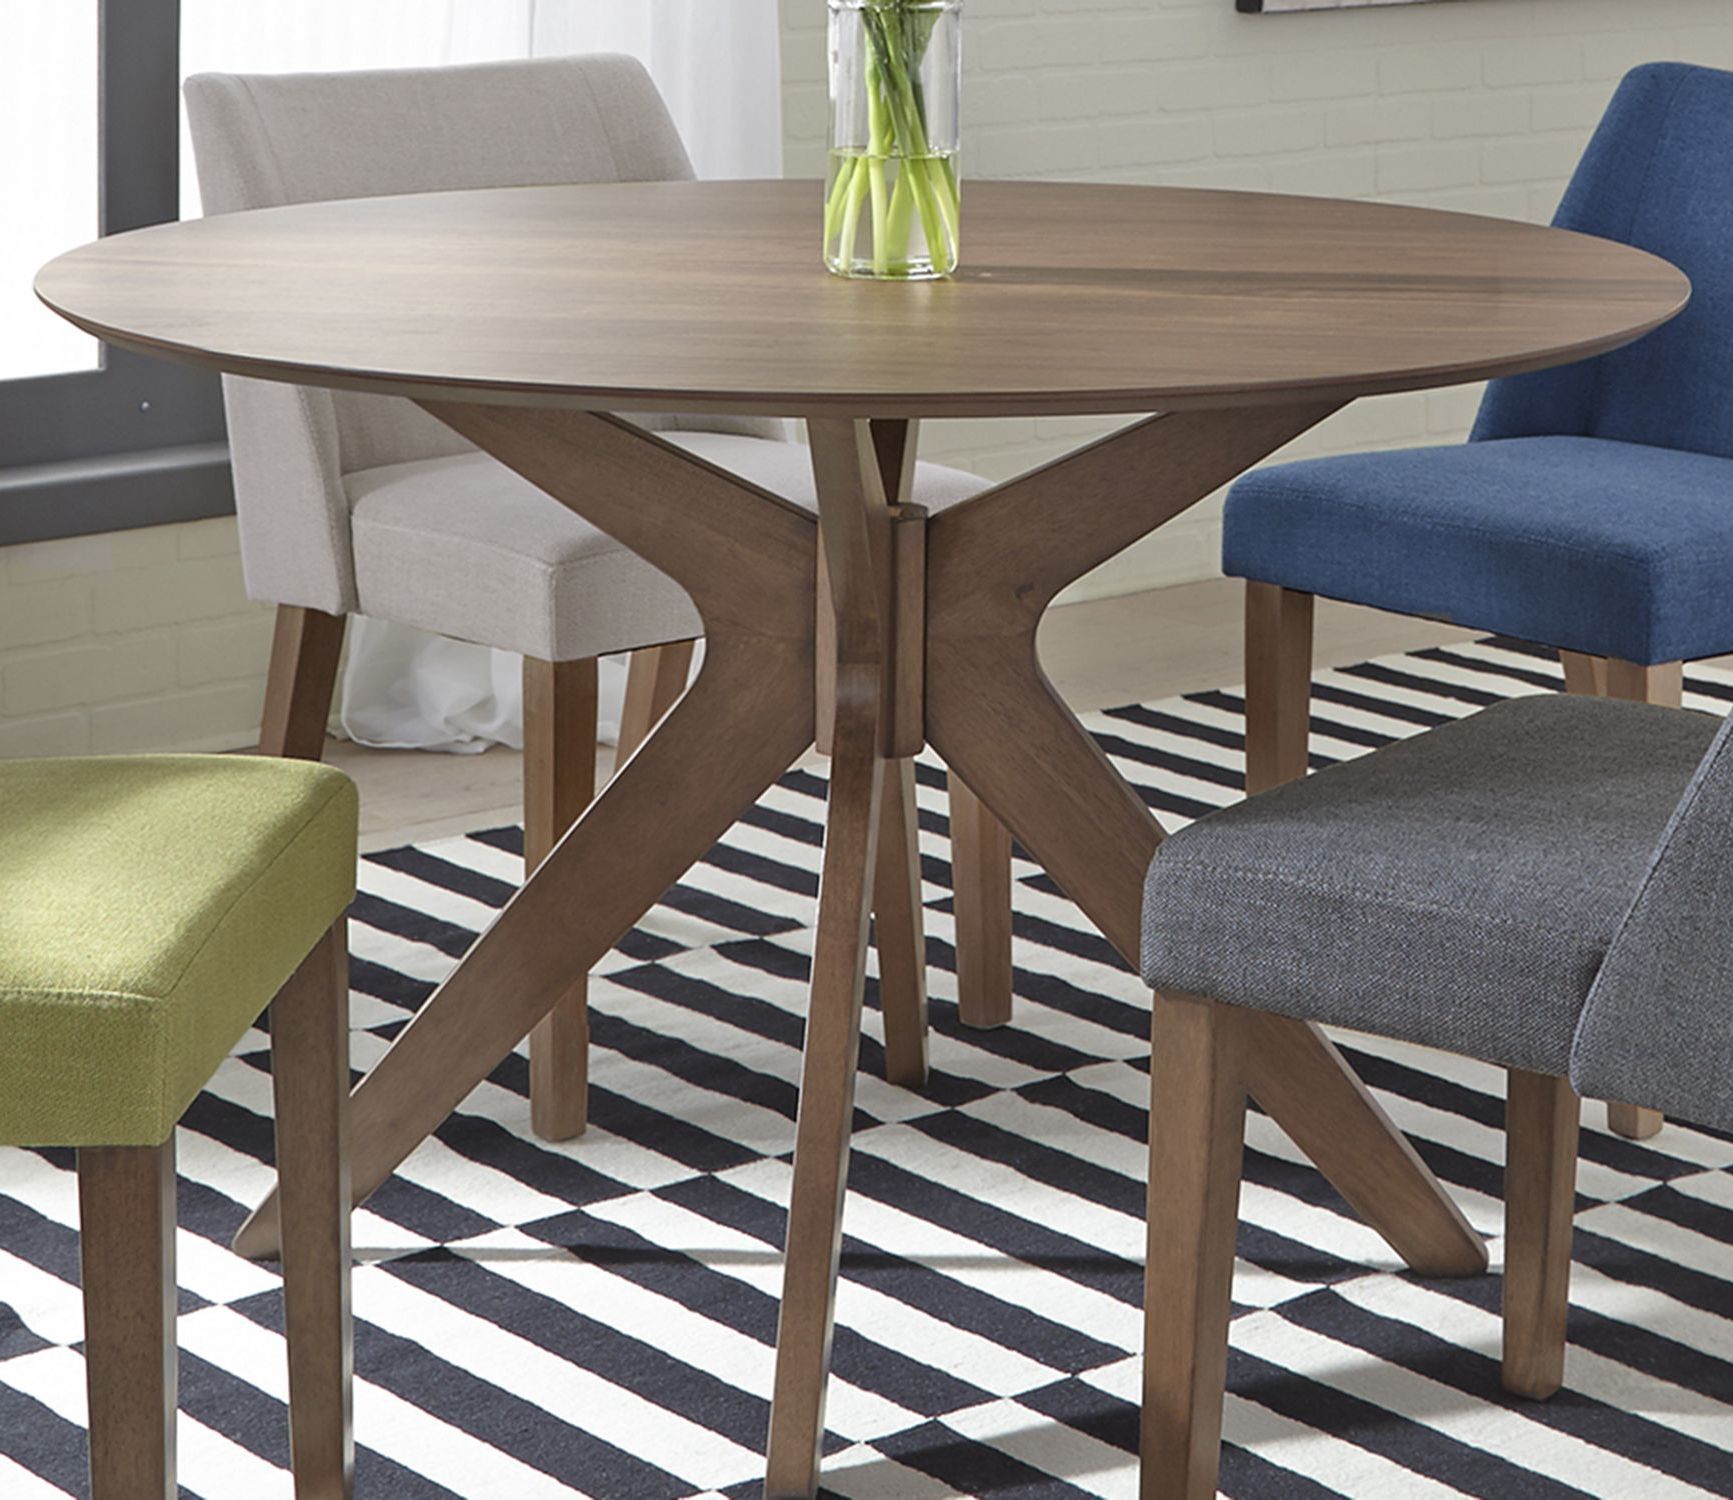 Space Saver Dining Table For 6 - This dining set is designed to